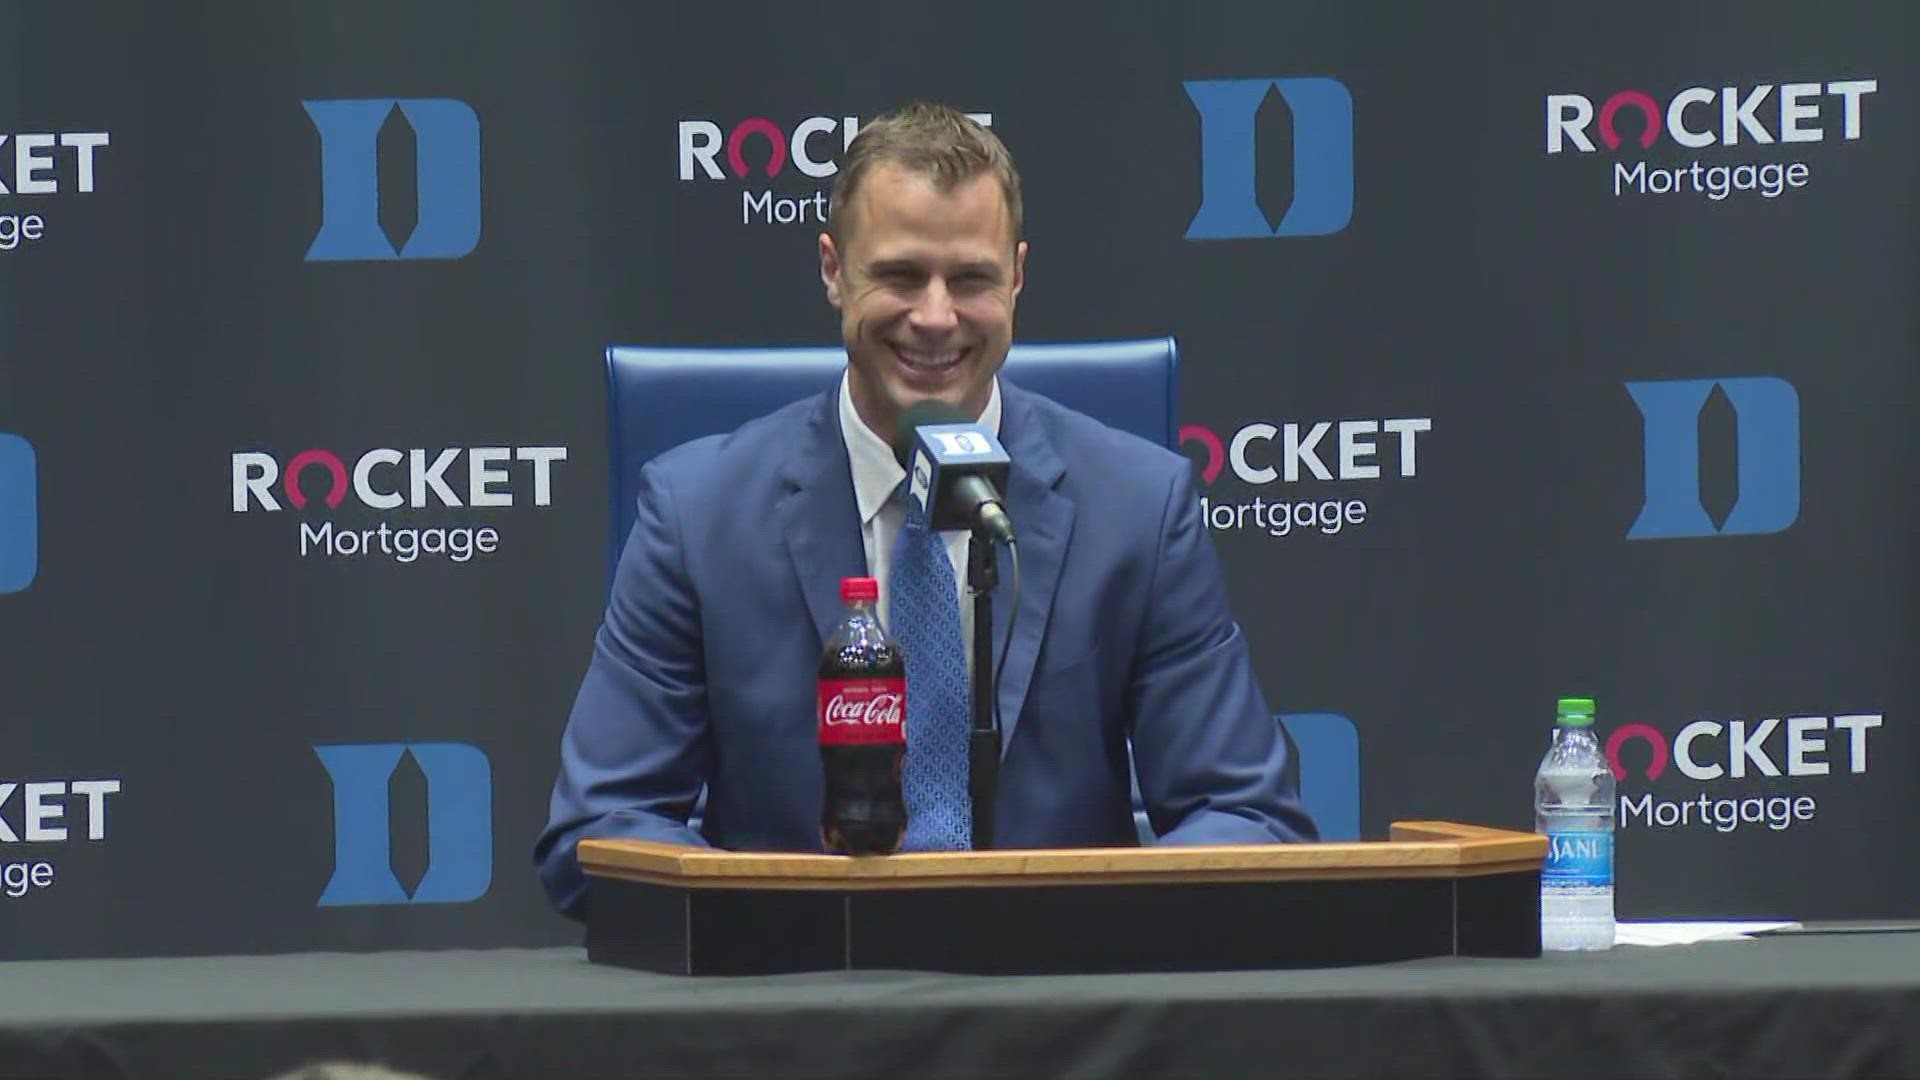 When asked how he felt about following in Duke Hall of Fame head coach Mike Krzyzewski's footsteps, Scheyer said he's "not afraid."